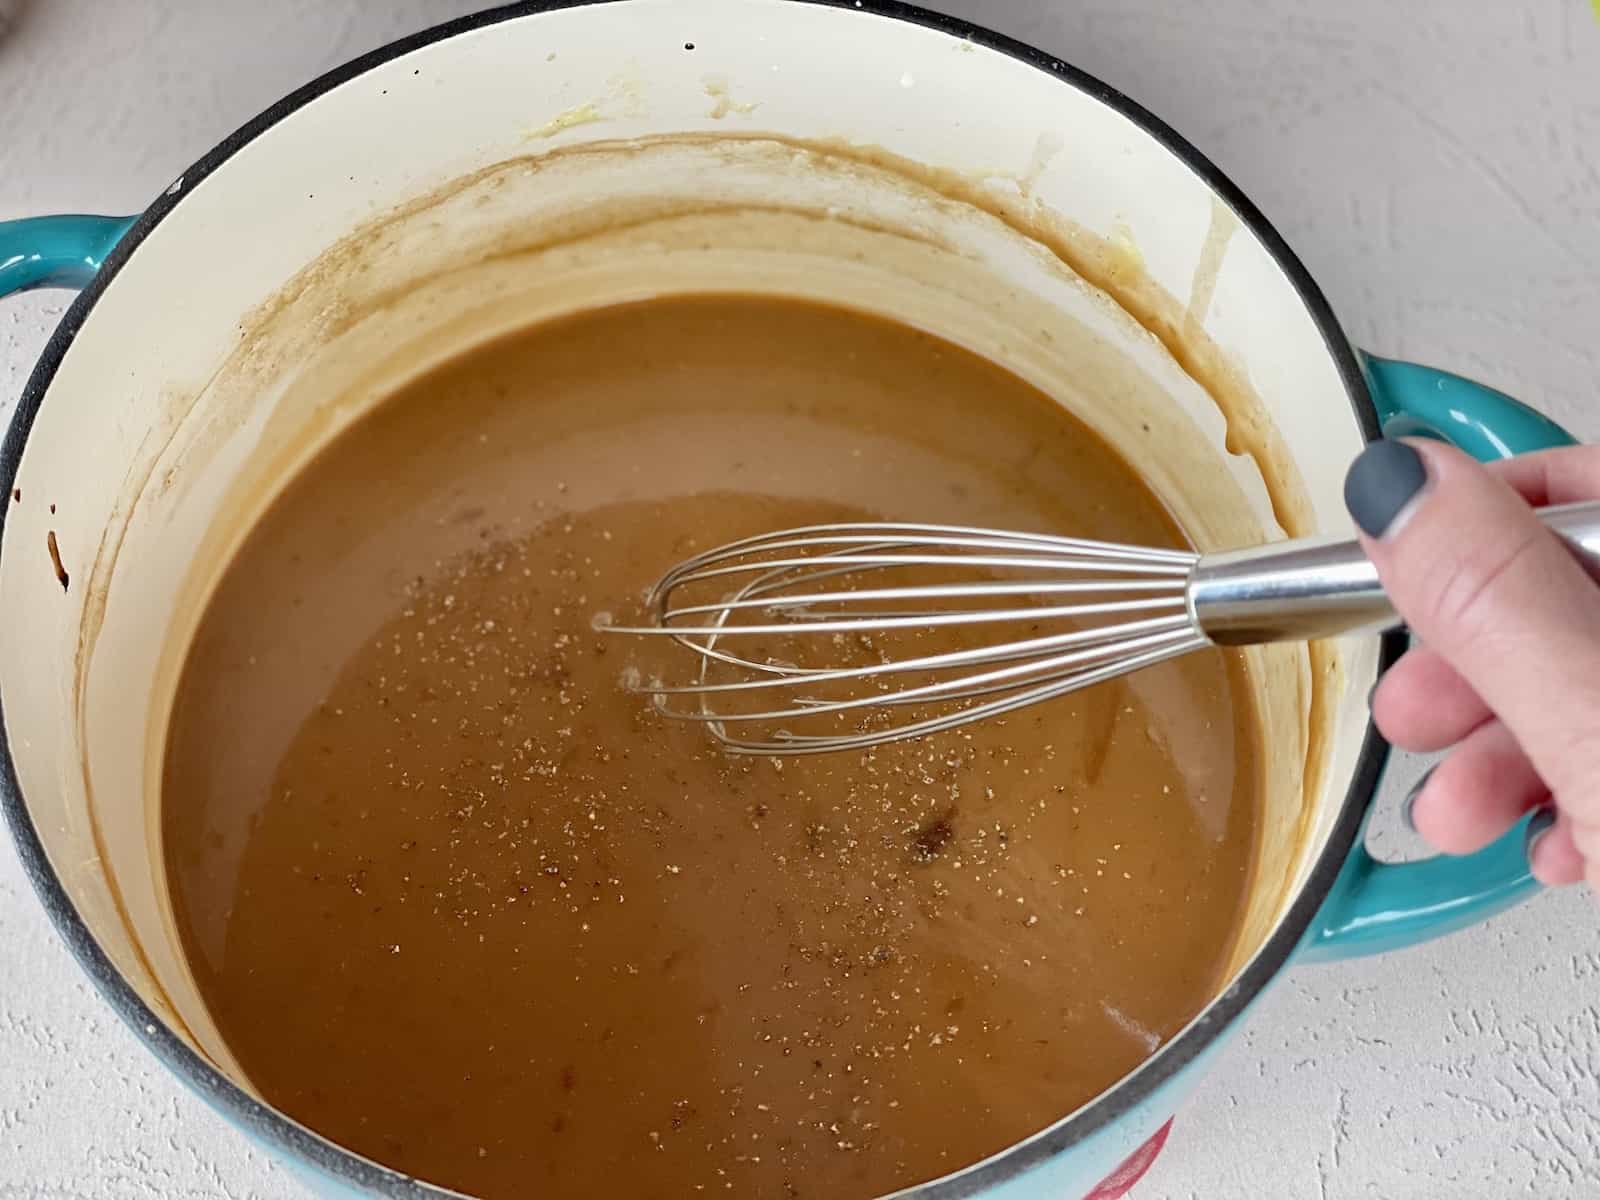 a teal enameled cast iron pot with a hand whisking gravy without drippings